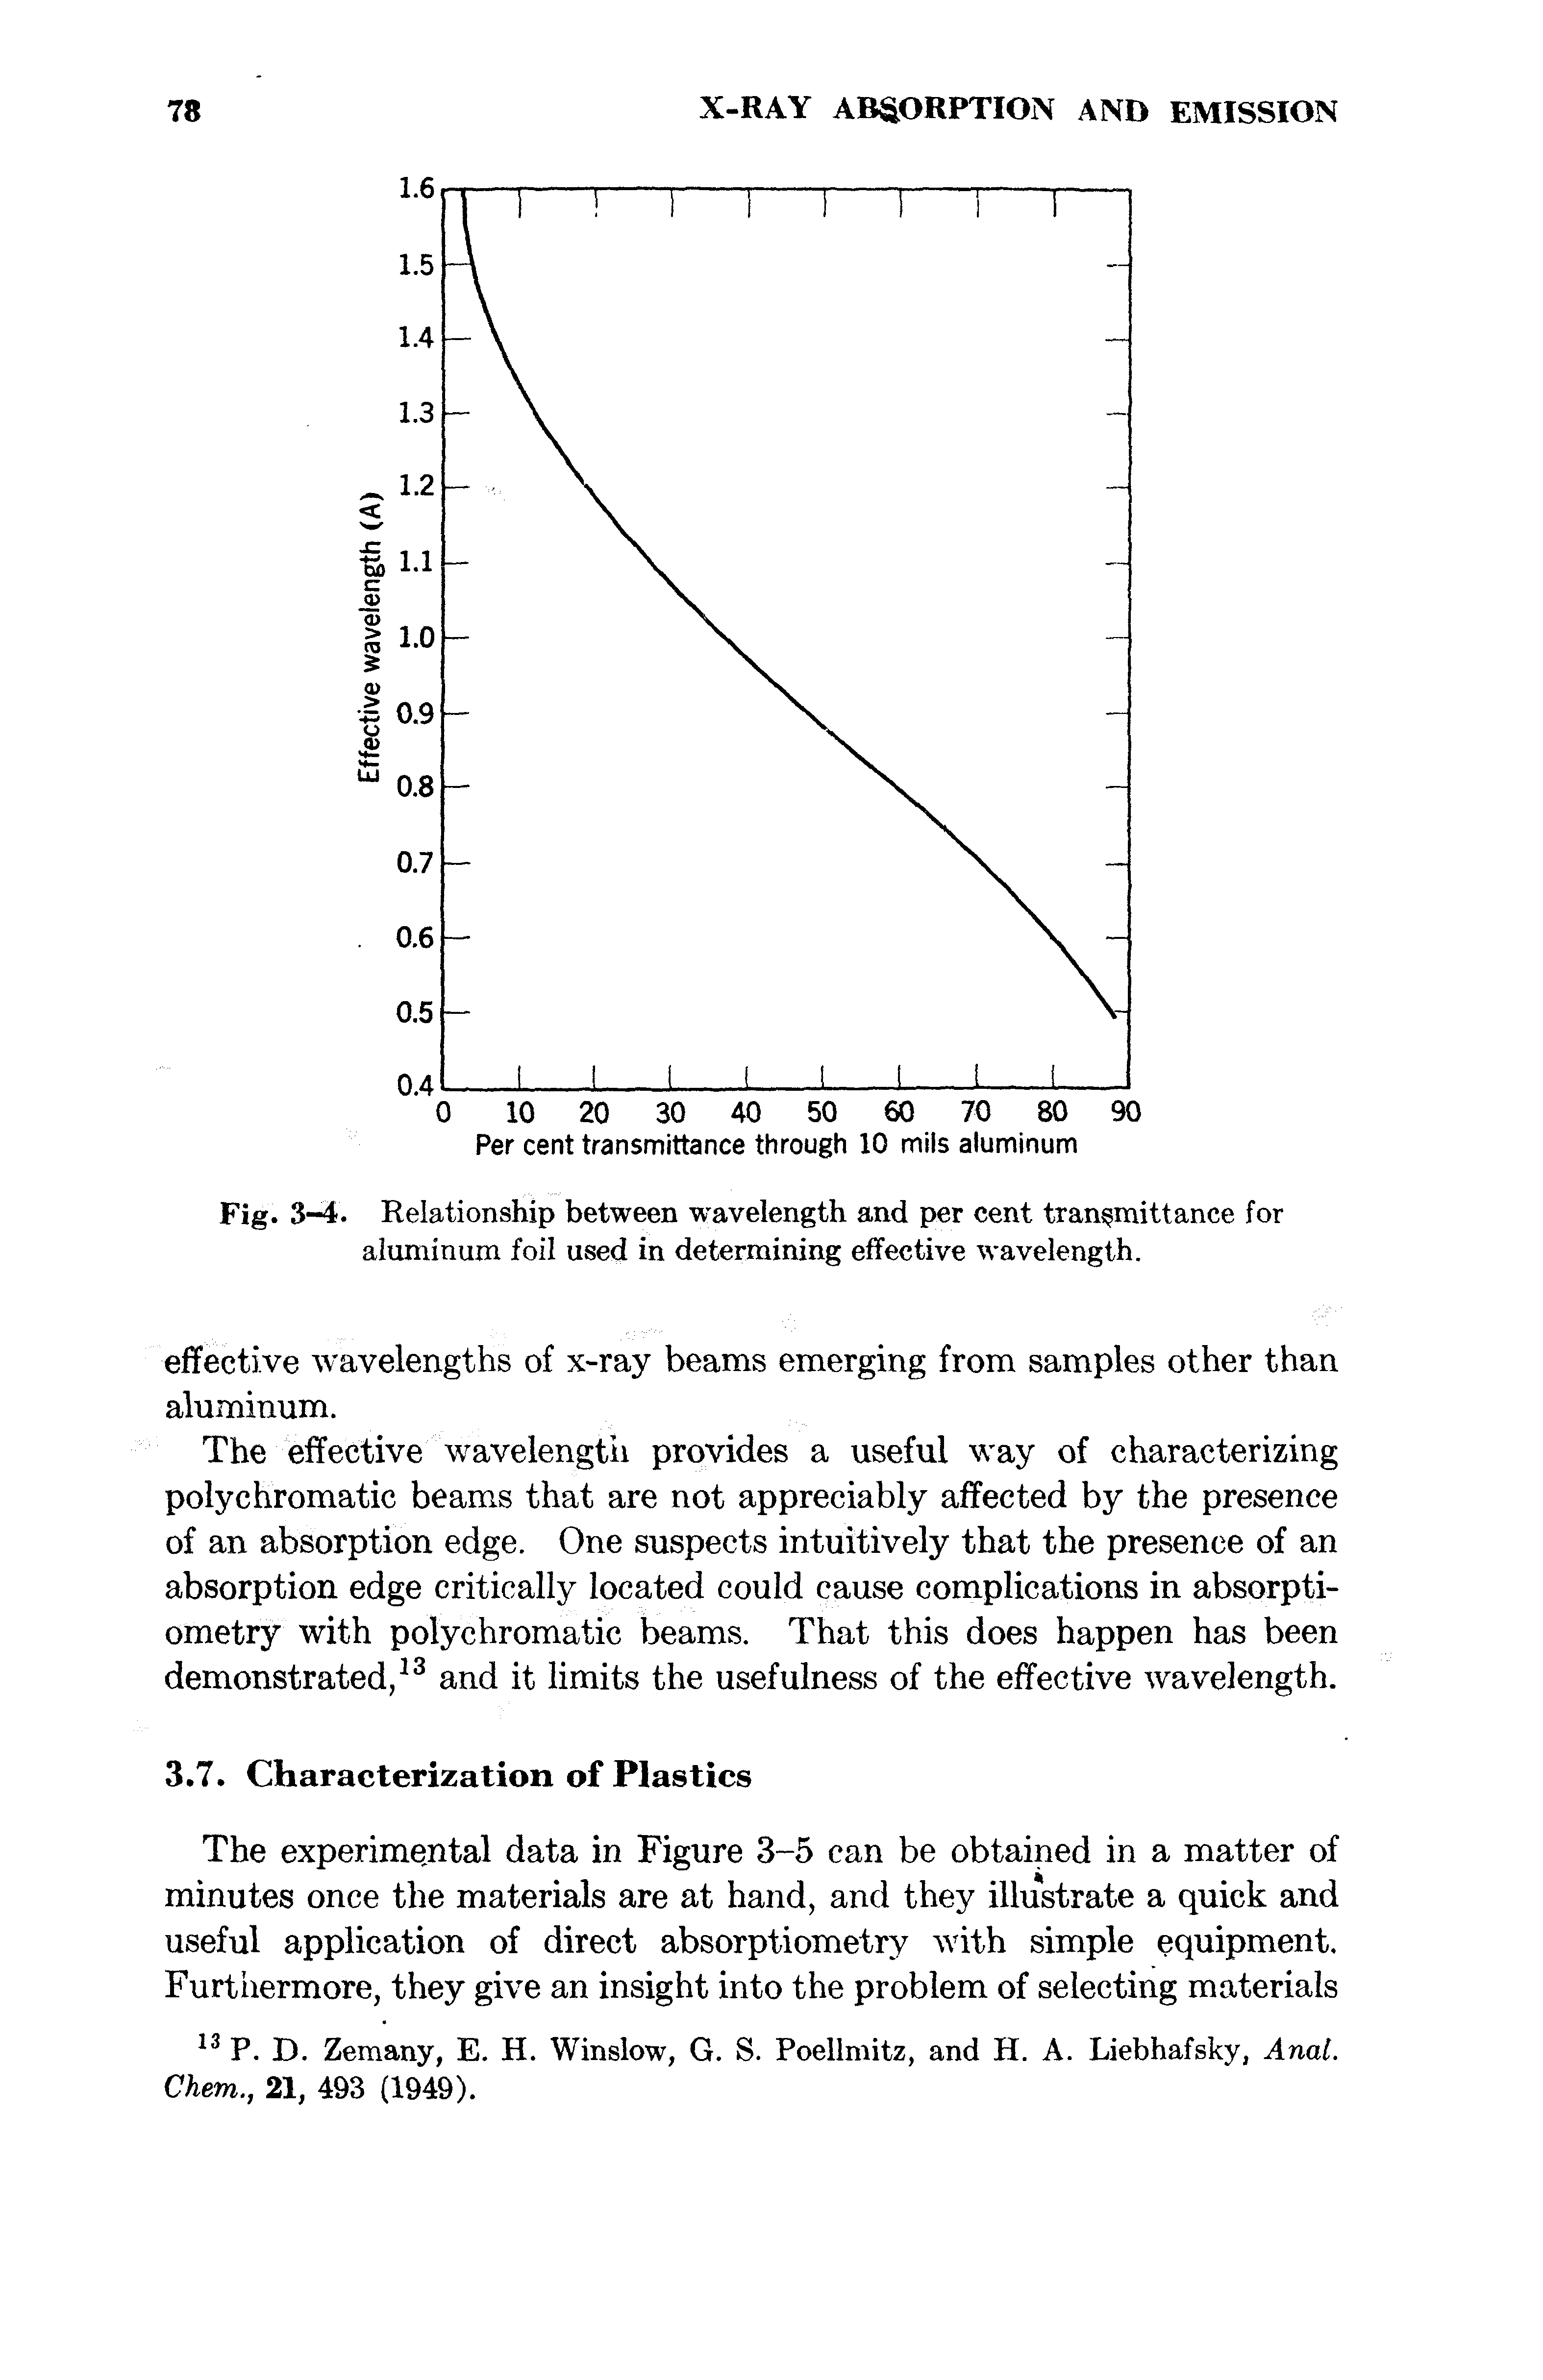 Fig. 3-4. Relationship between wavelength and per cent transmittance for aluminum foil used in determining effective wavelength.